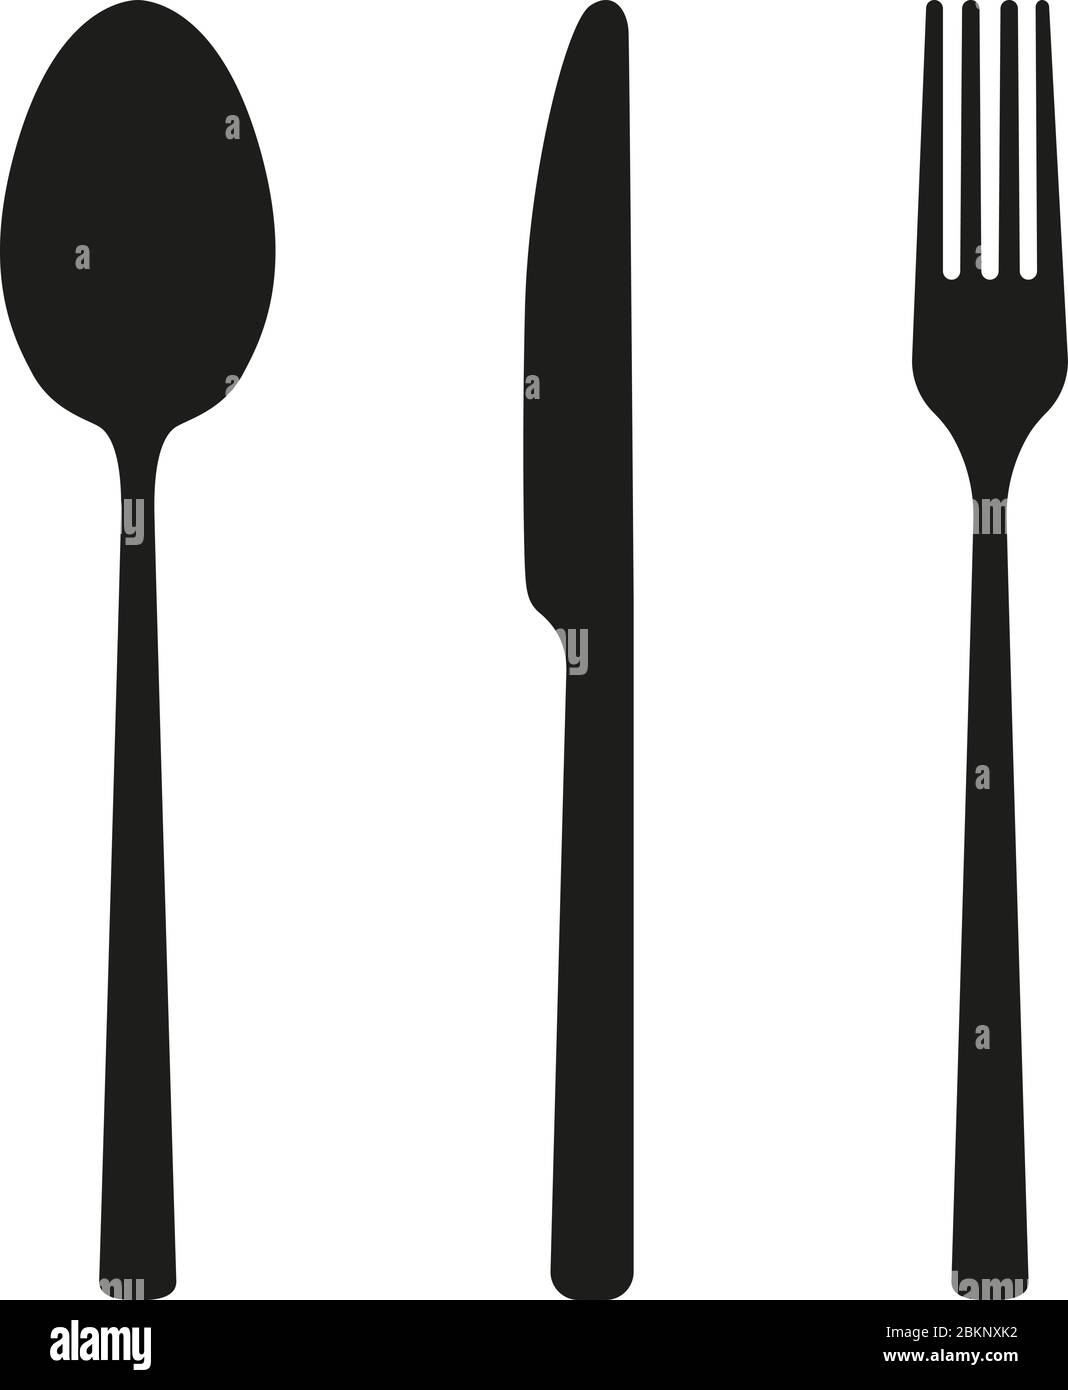 Fork Spoon Knife With Red Bow Set Of Utensils For Eating Stock Illustration  - Download Image Now - iStock